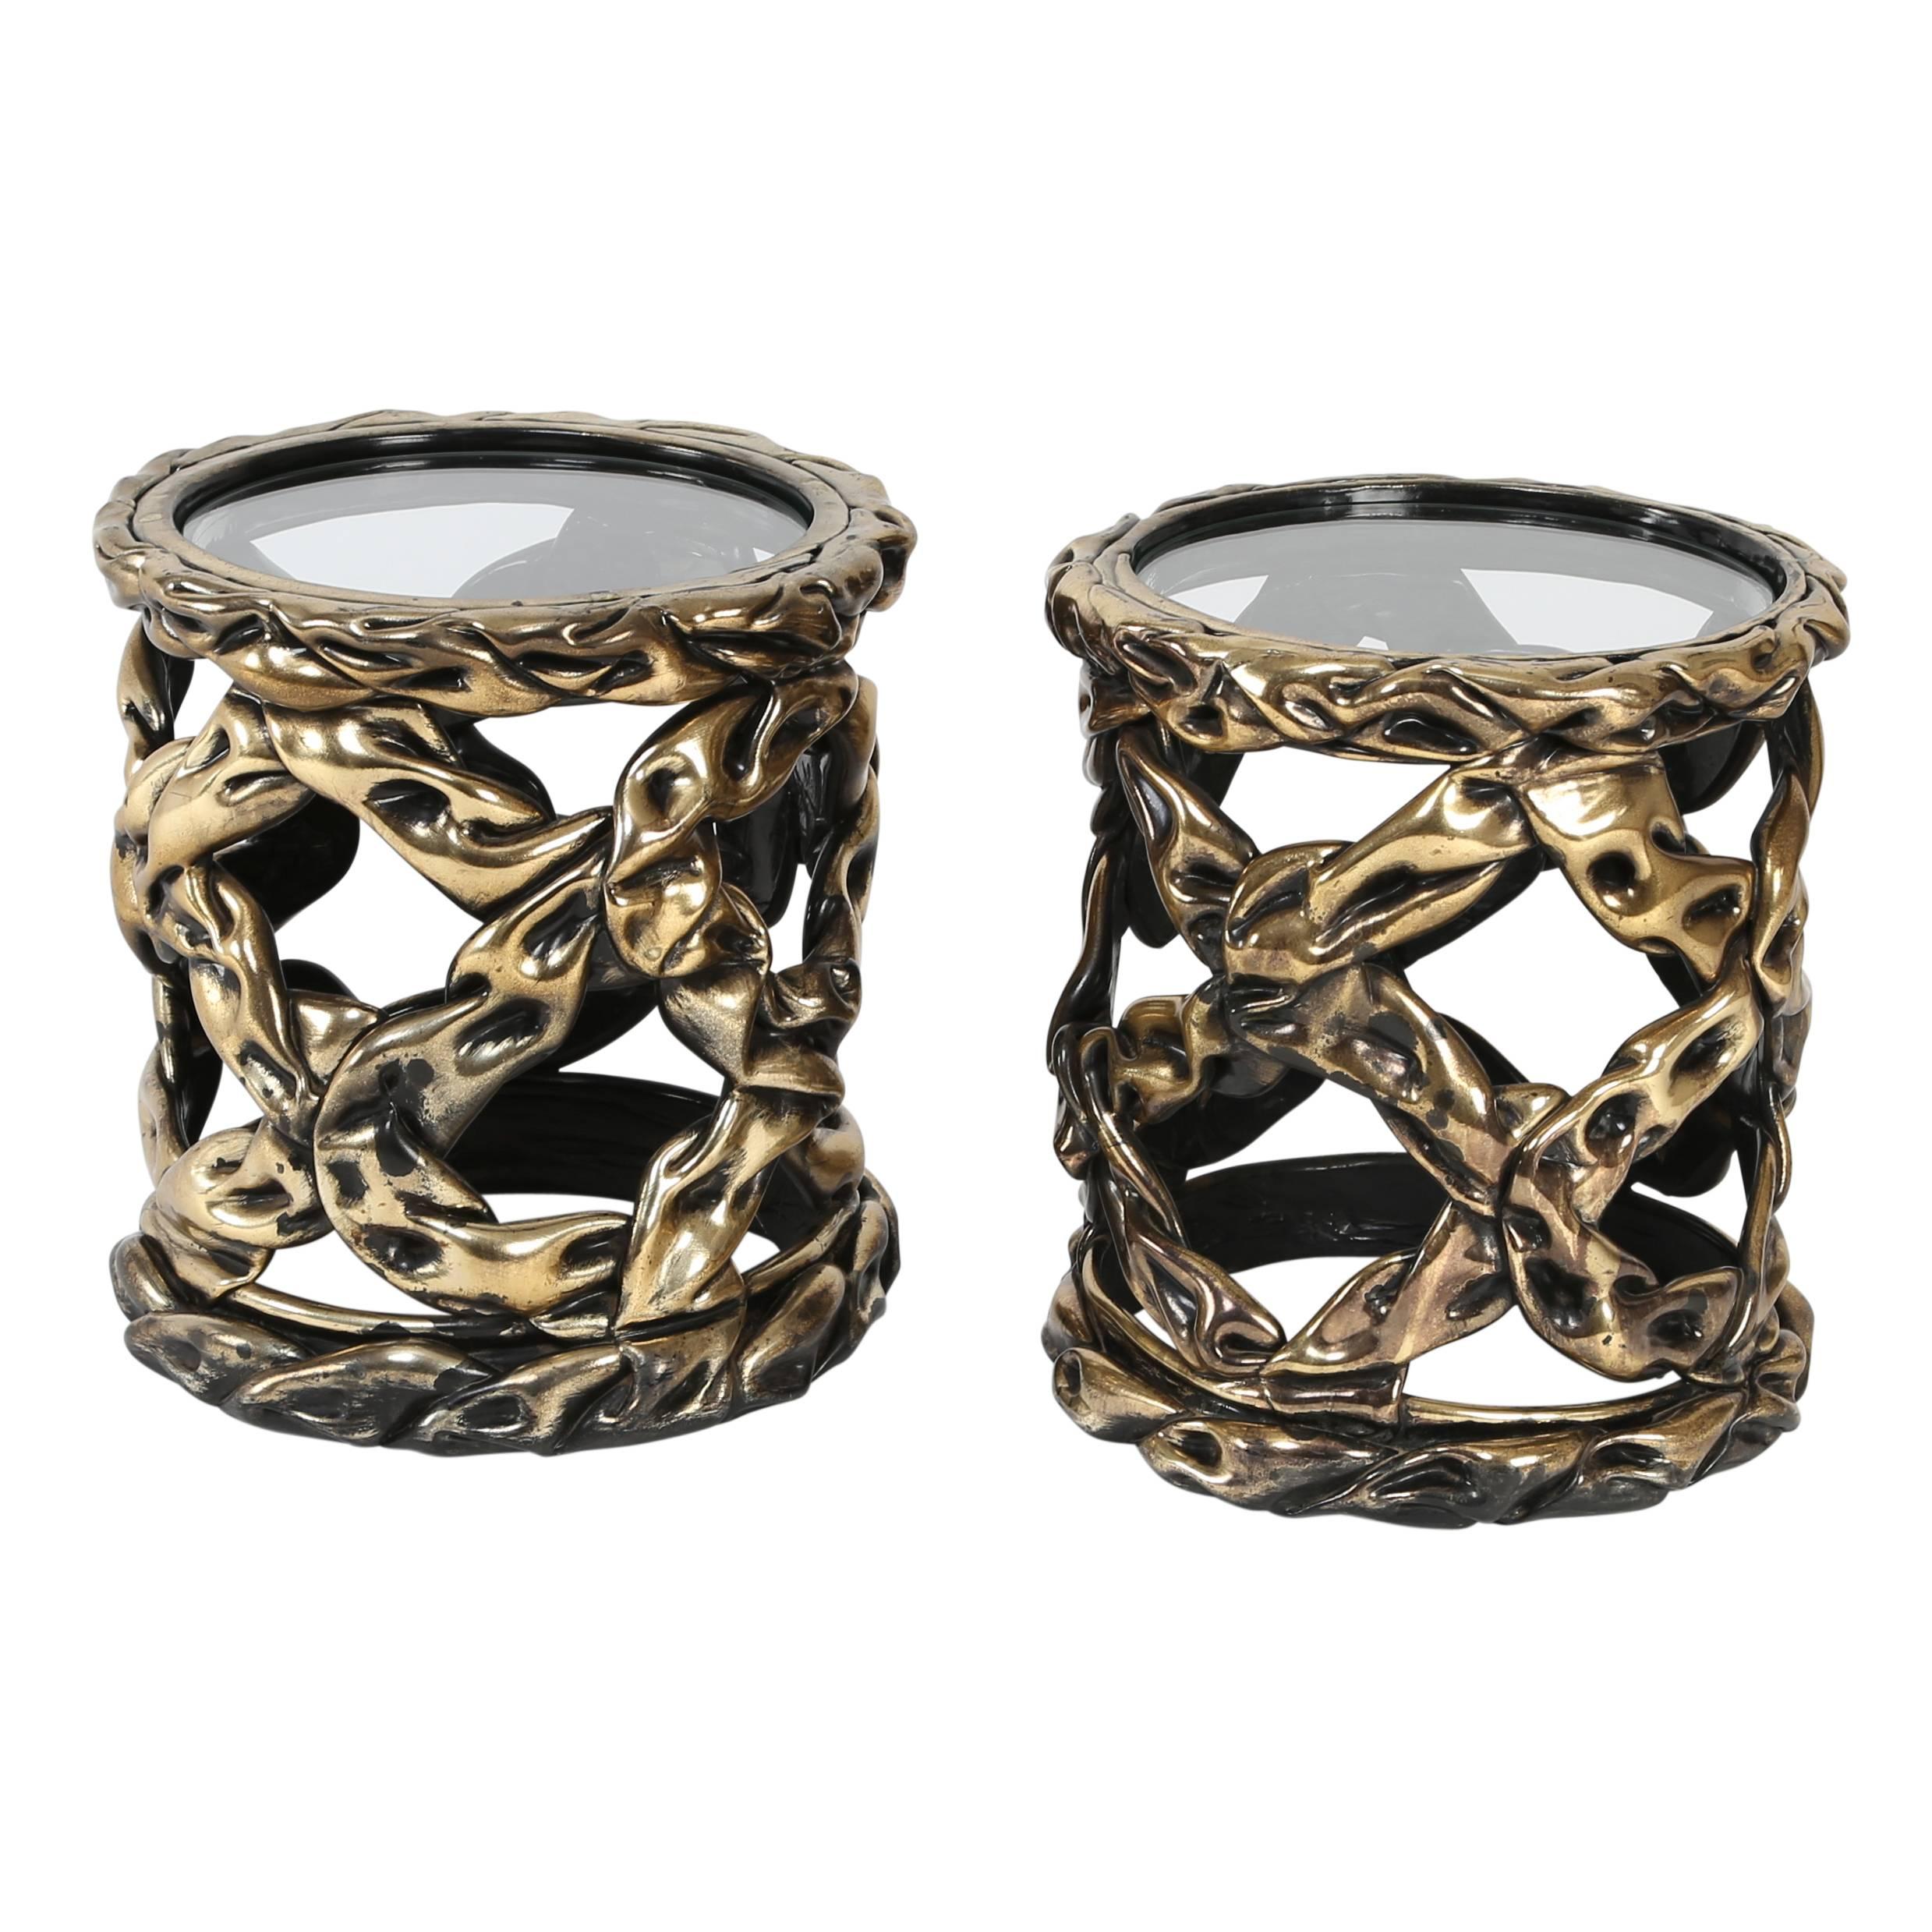 Pair of 1970s "Ribbon" side tables with gold/brass tones and circular glass tops